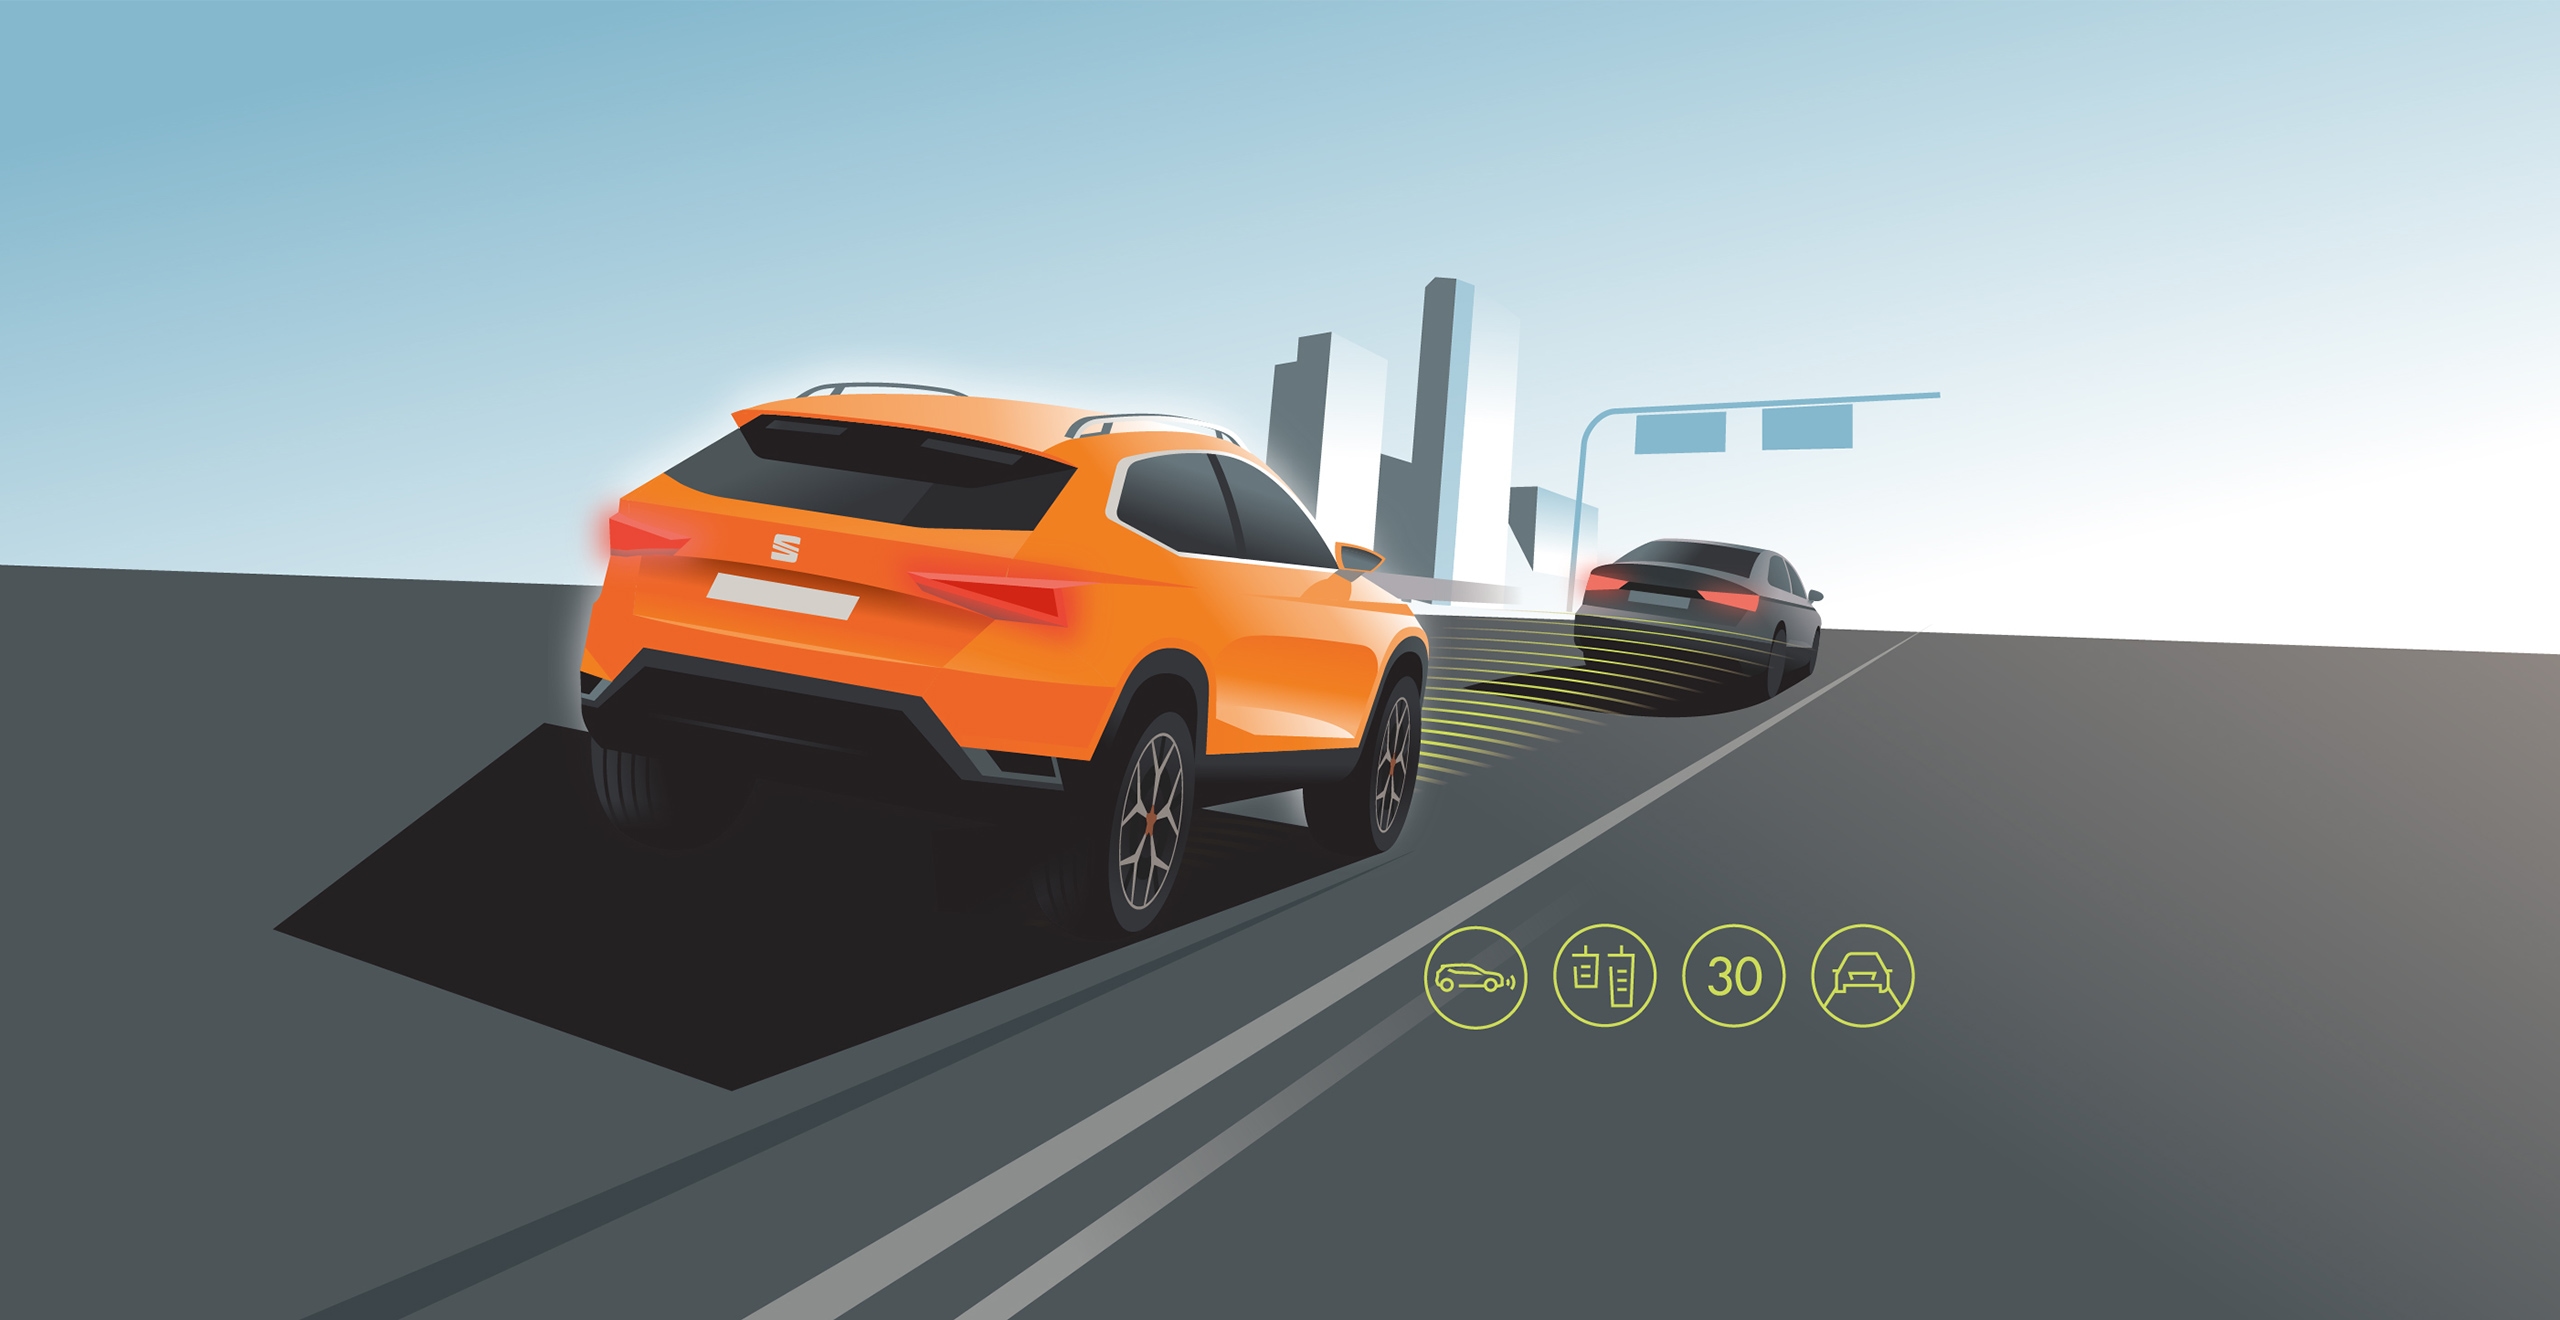 SEAT Ateca ACC predictive safety feature illustration